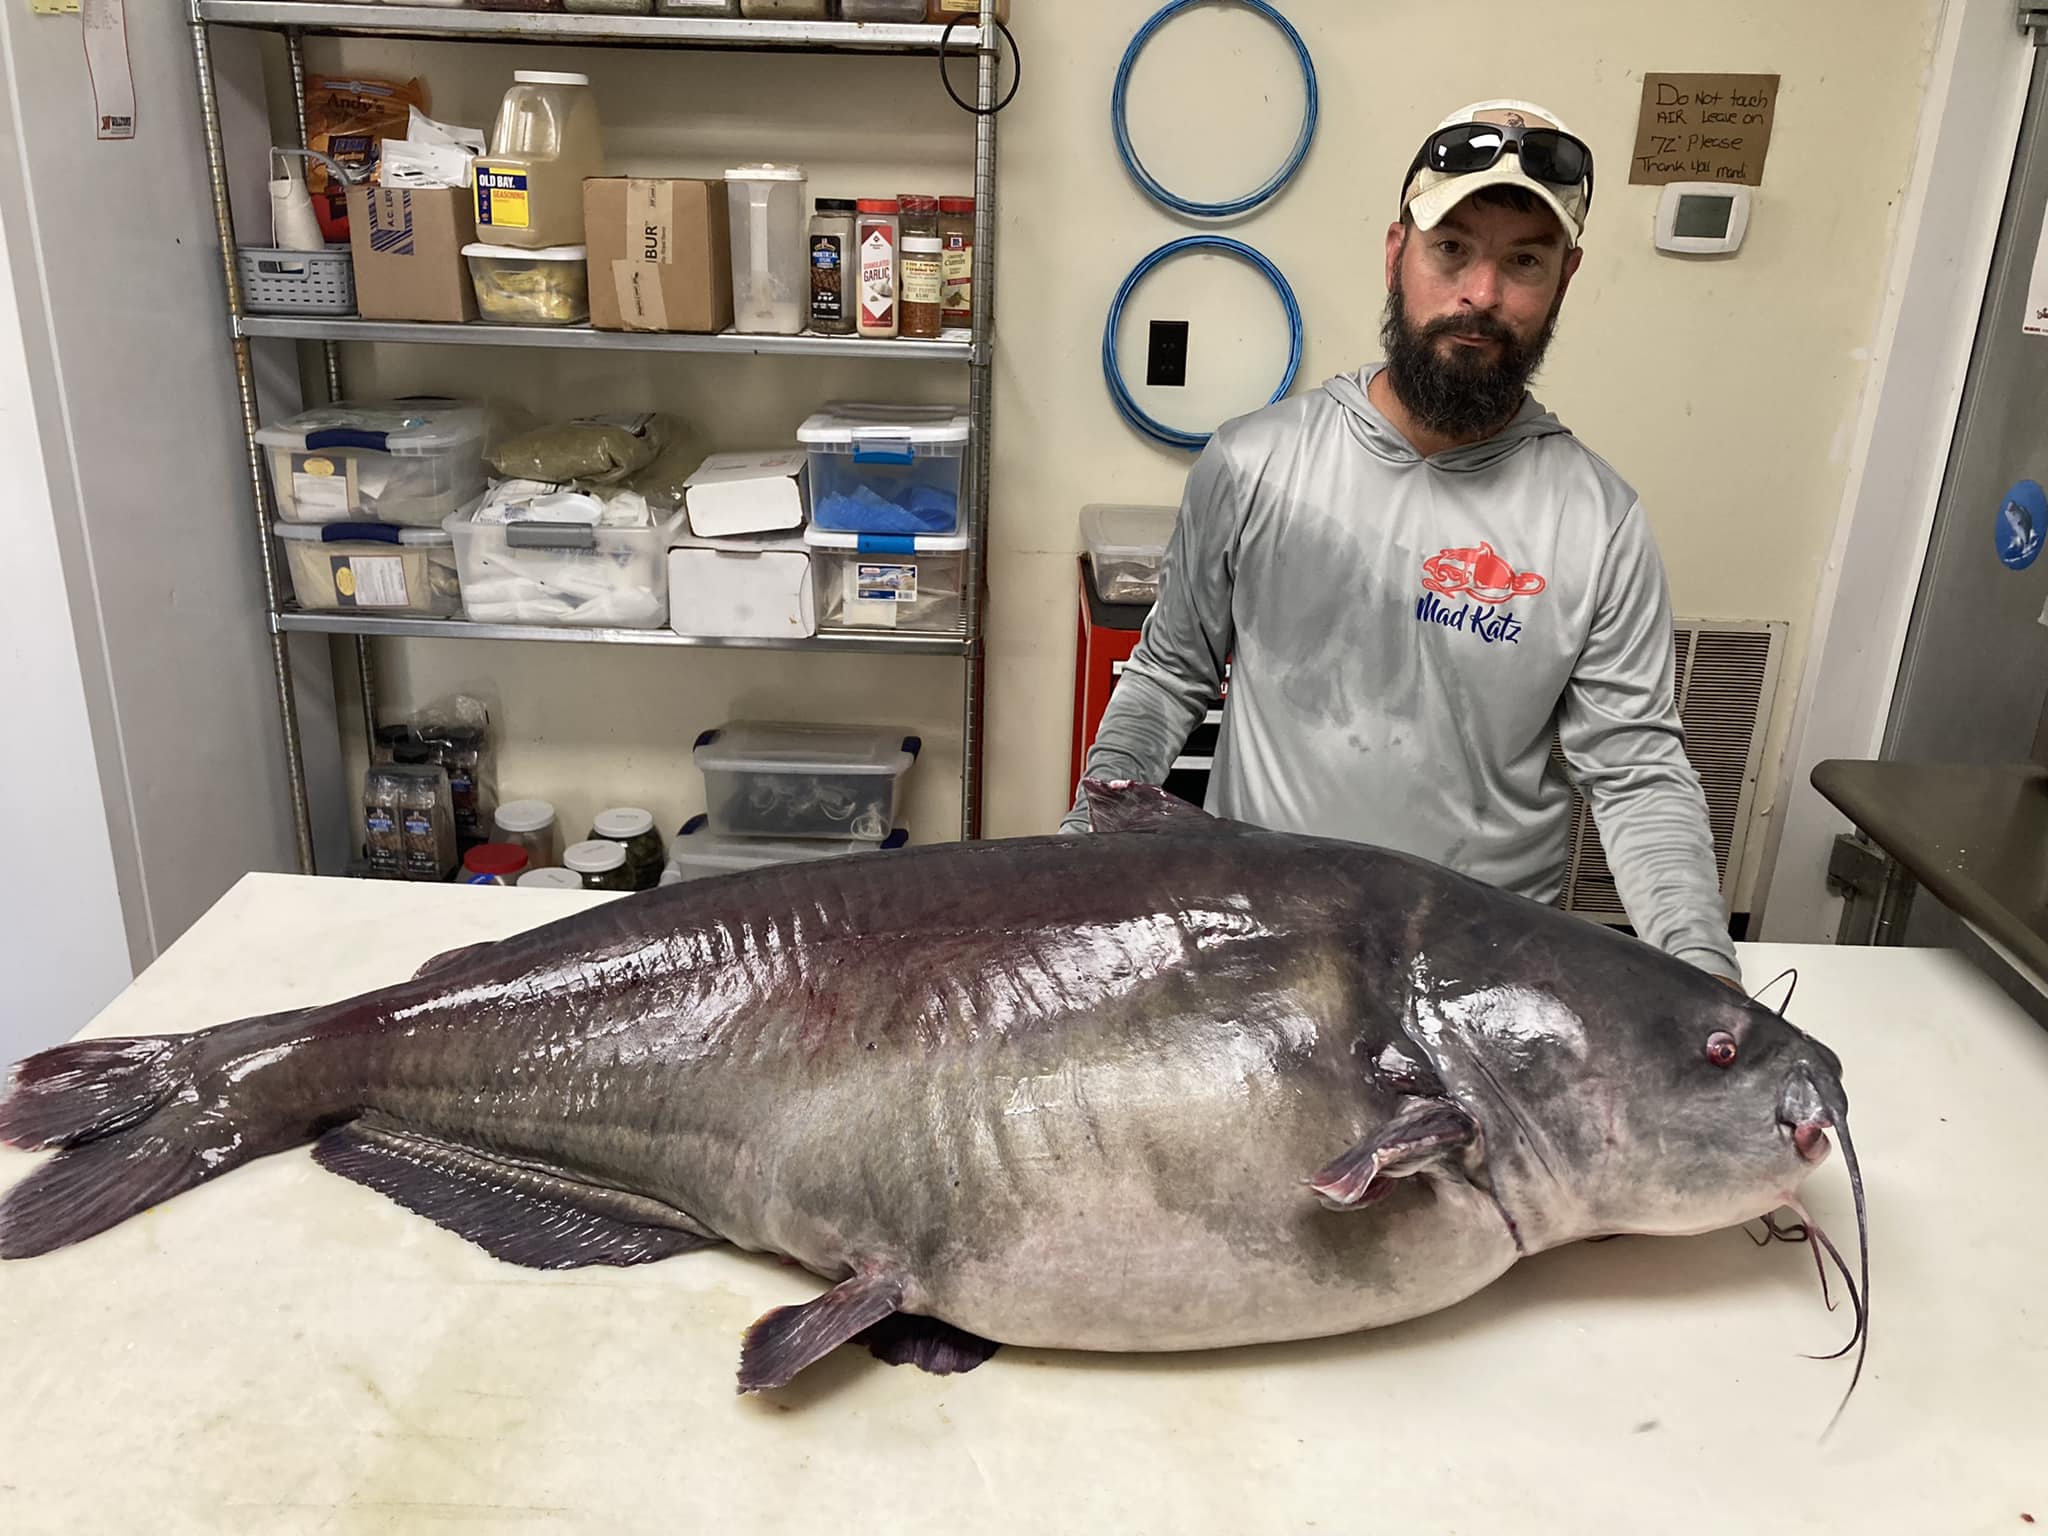 Monster' blue catfish could break Tennessee record, wildlife officials say